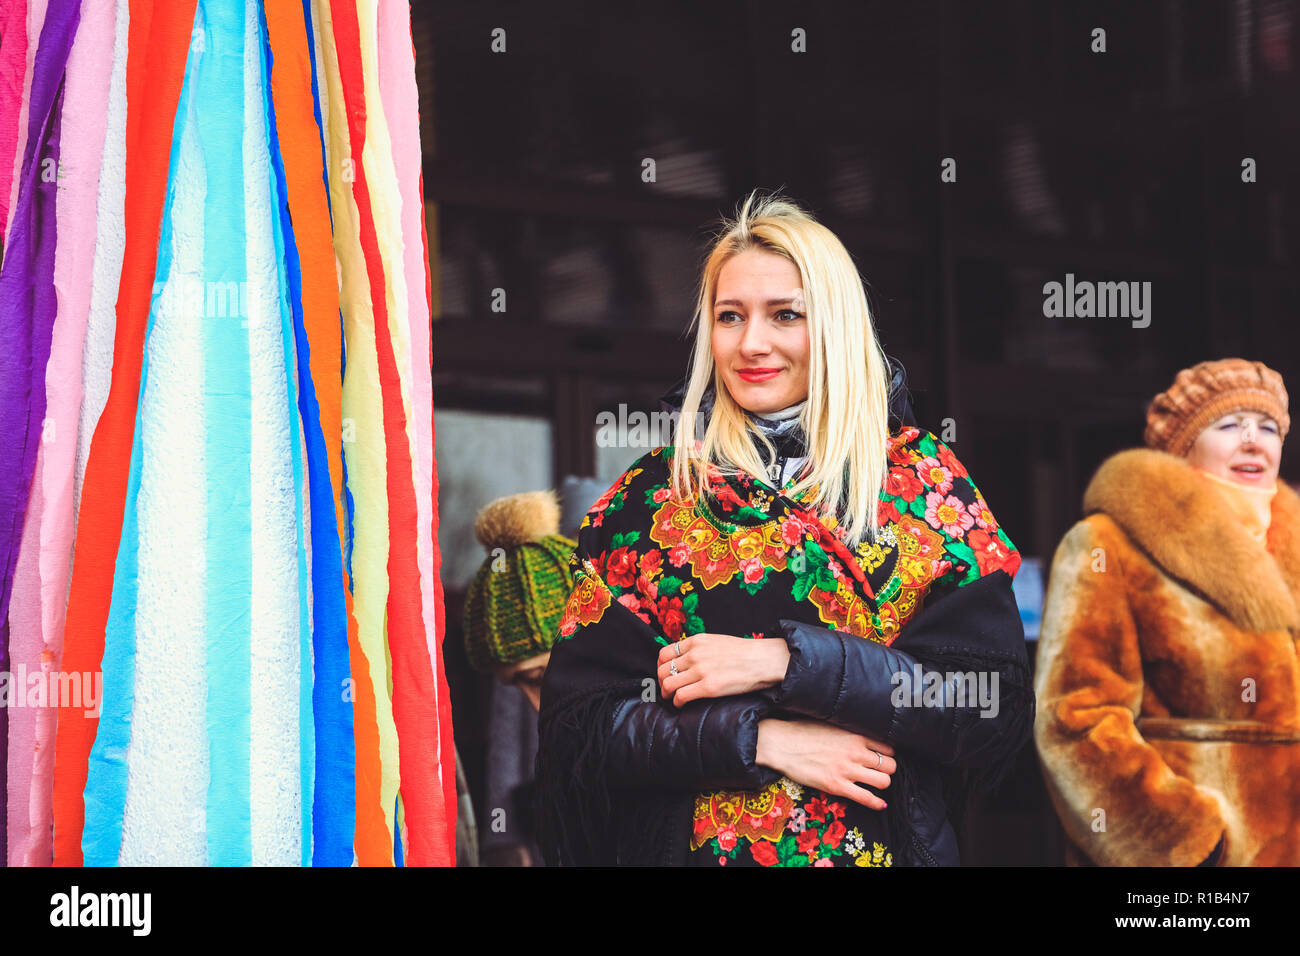 Gomel, Belarus - February 18, 2018: Beautiful young woman in Belarusian shawl at the Shrovetide fair in Gomel Stock Photo